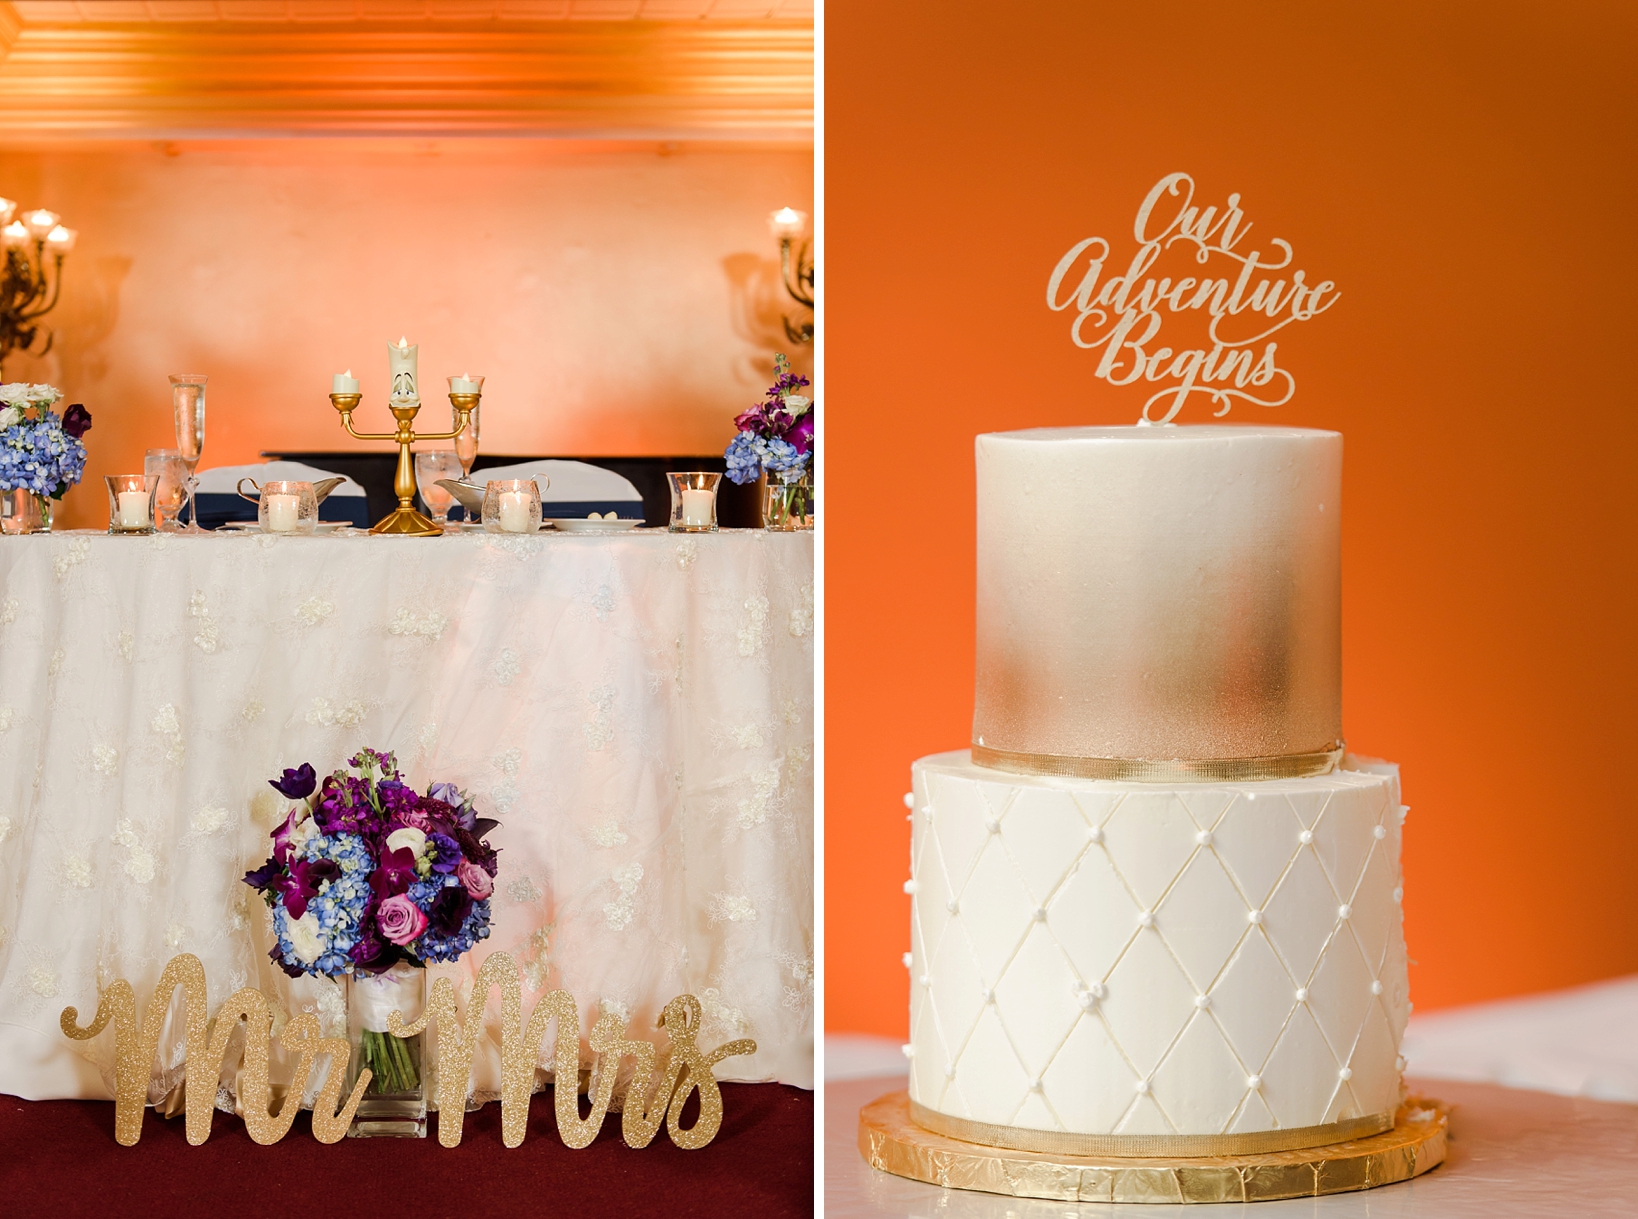 The wedding cake with gold topper and accents by Sarah & Ben Photography